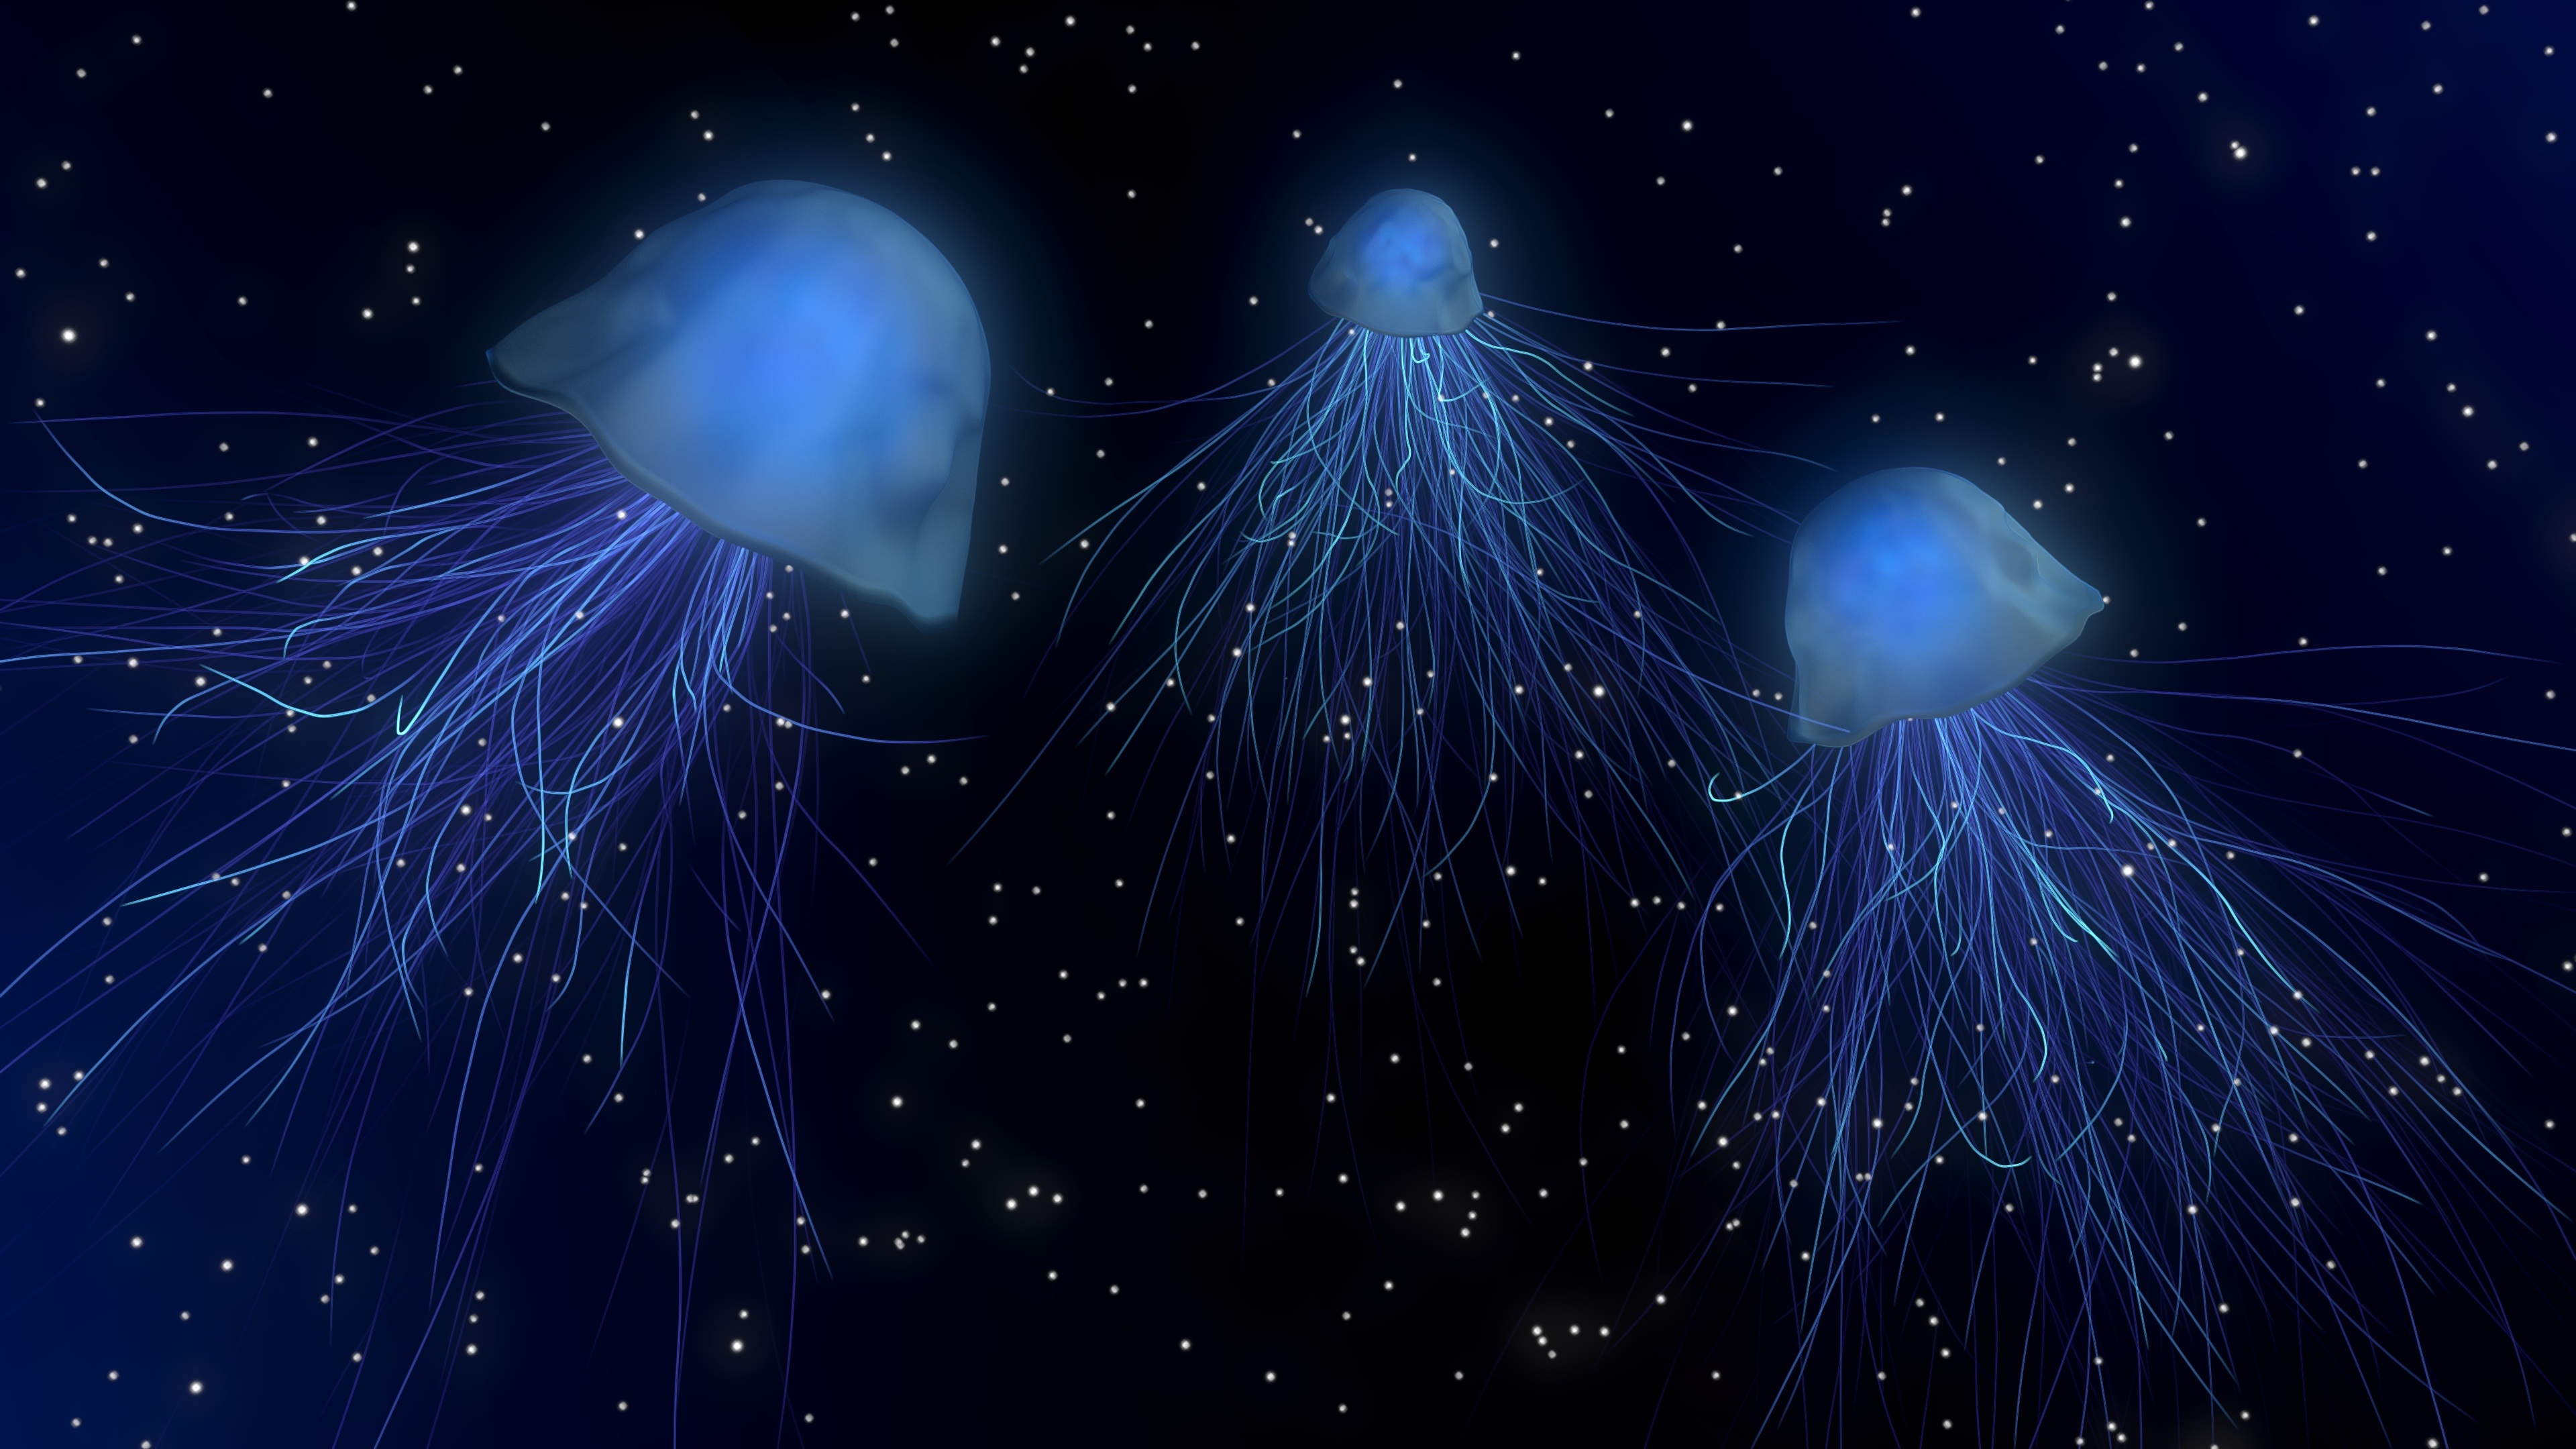 Jellyfish Wallpapers - Top 25 Best Jellyfish Backgrounds Download